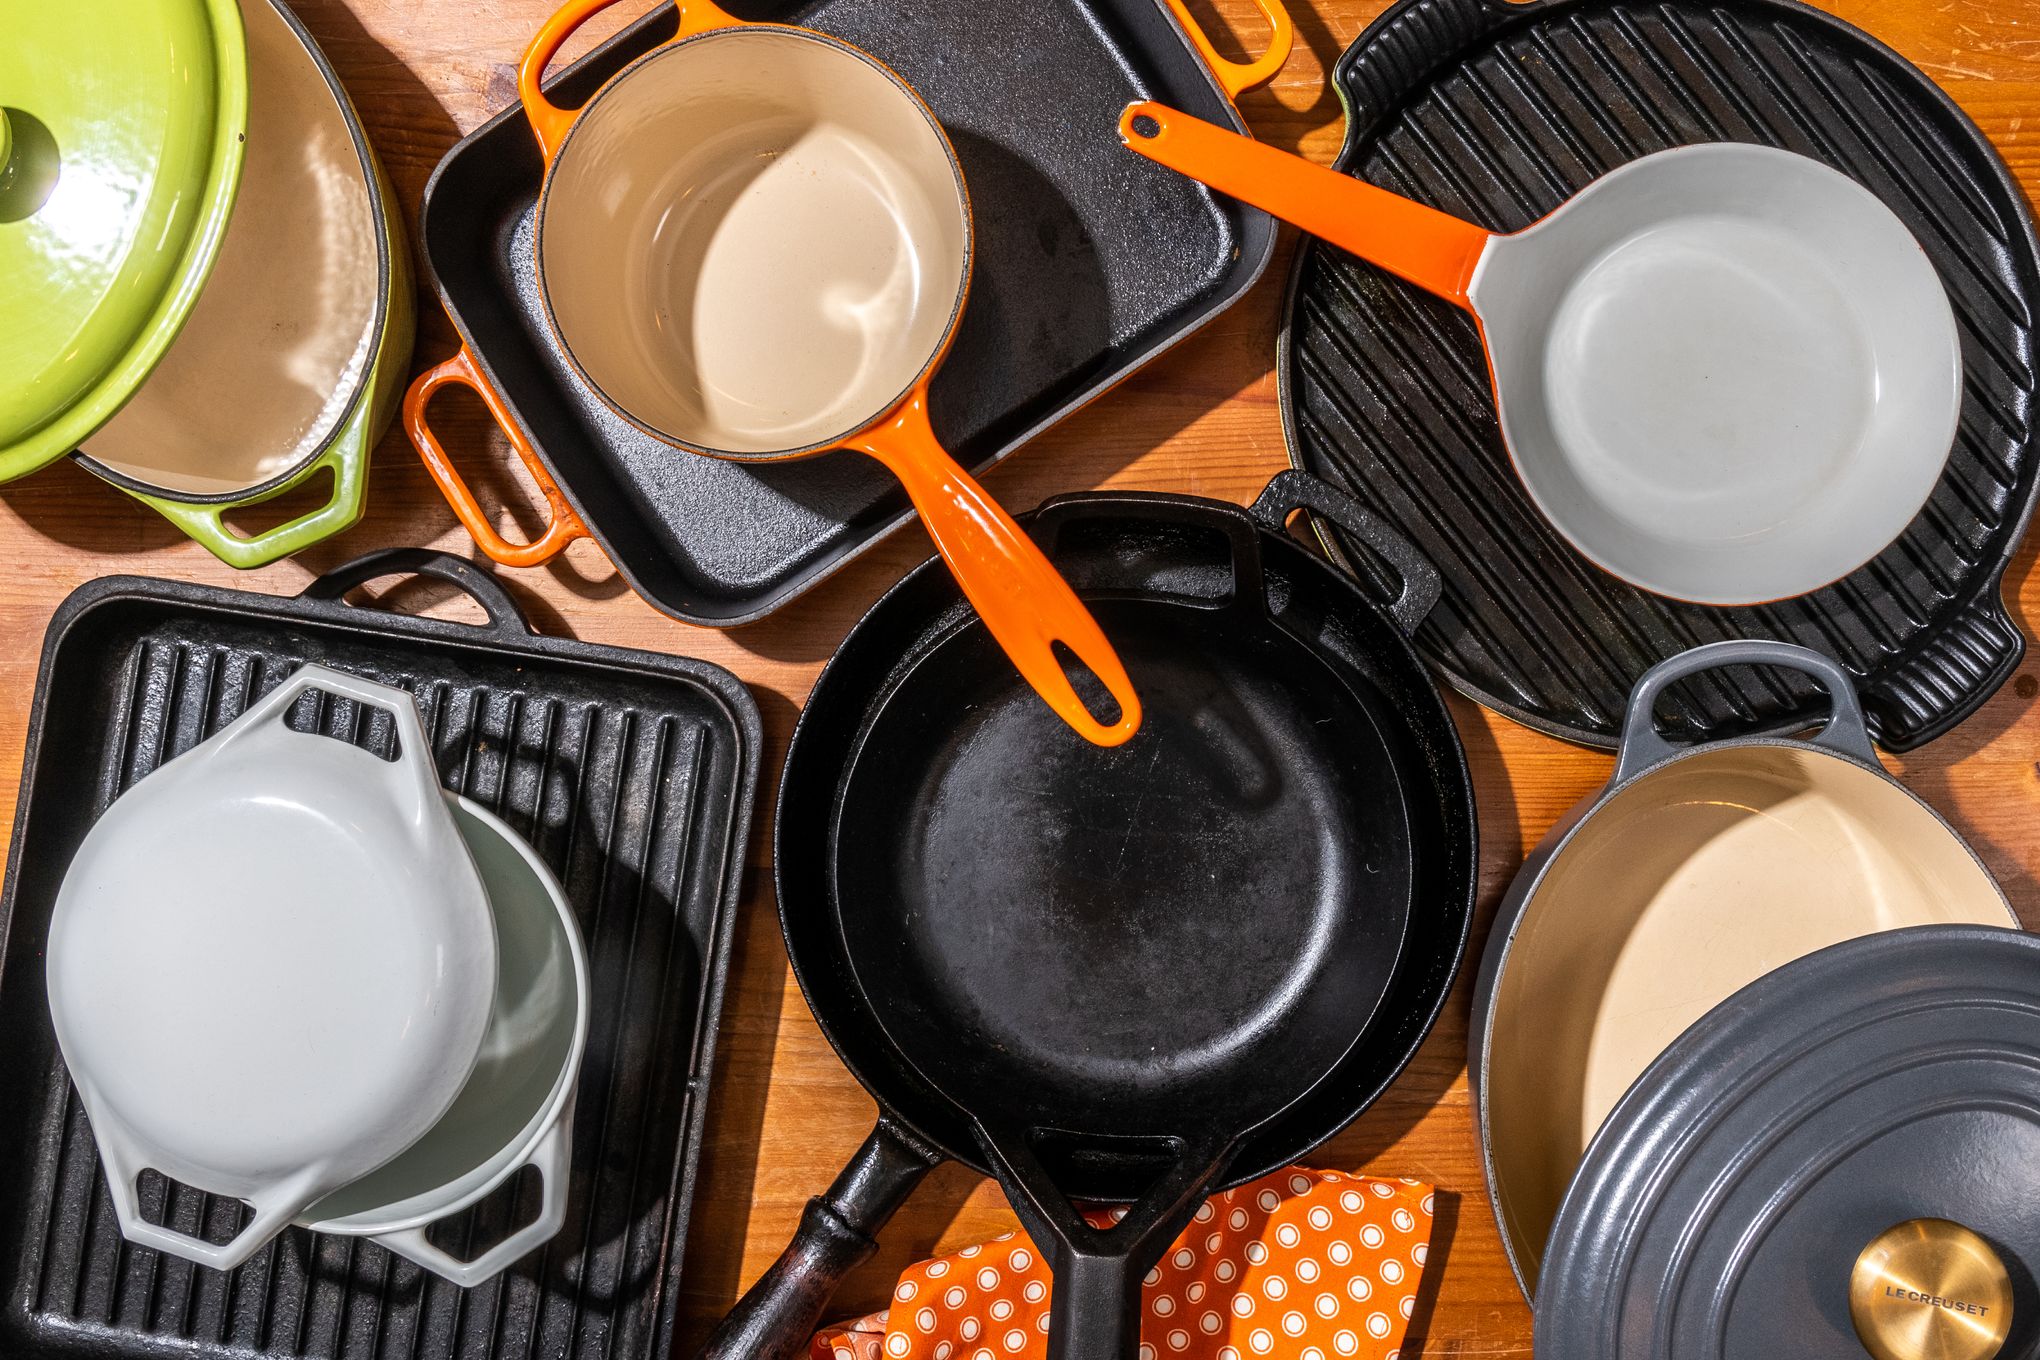 Porcelain Enamel Cookware - Definition and Cooking Information 